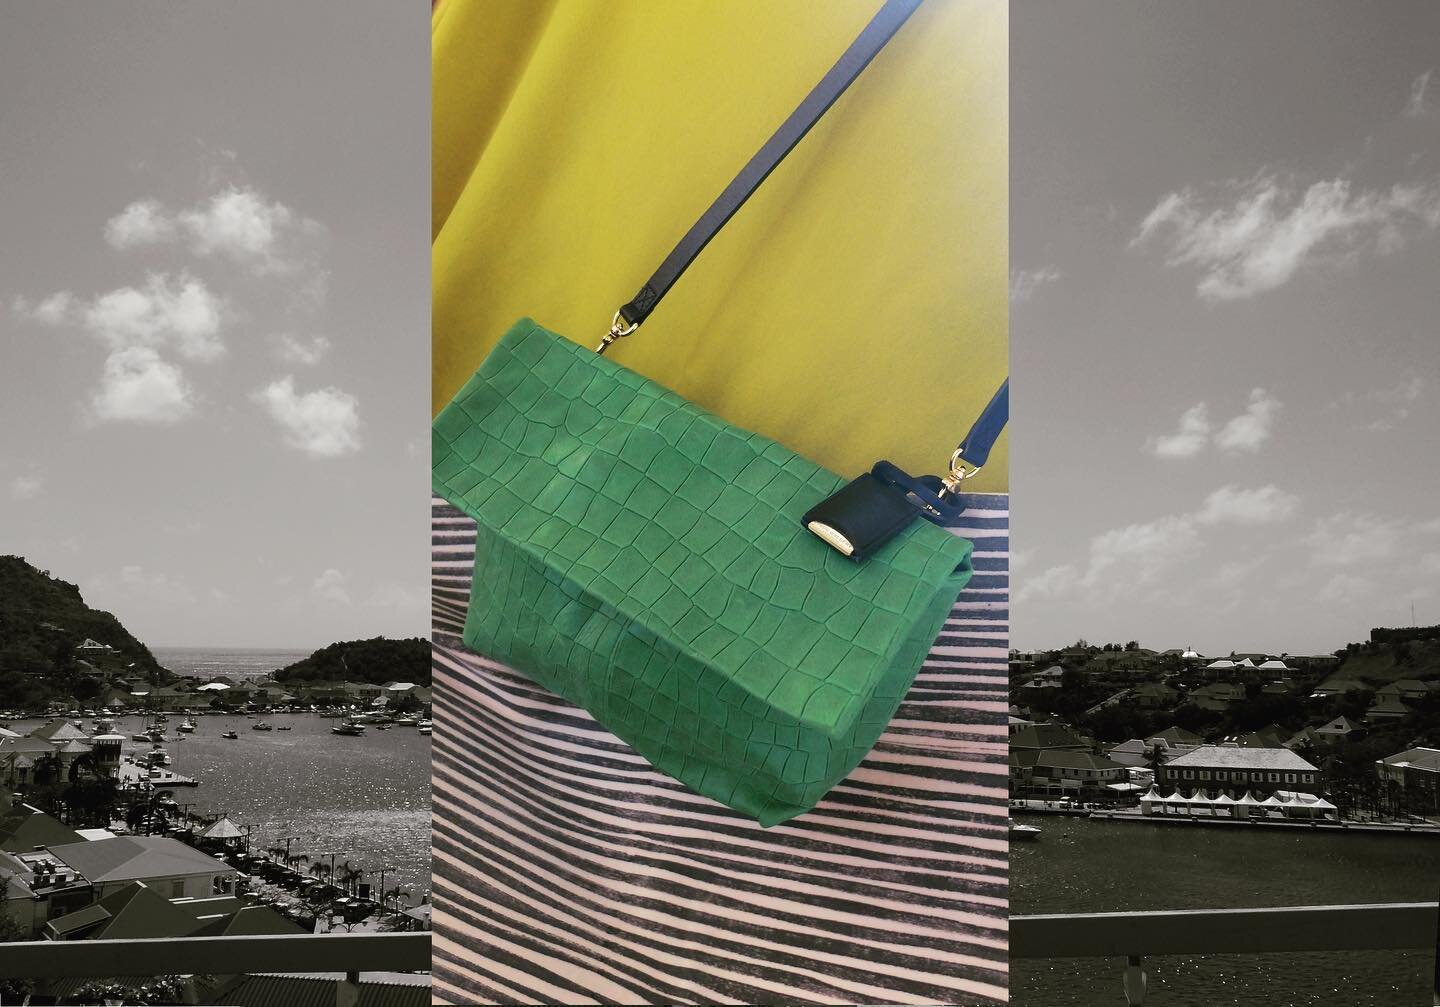 Marigot S - Alligator, embossed - Cactus
.
.
.
#summer2020🌴 #stbarth #memories #casualluxury #timeless #pieces #everydayheroes #madeinfrance